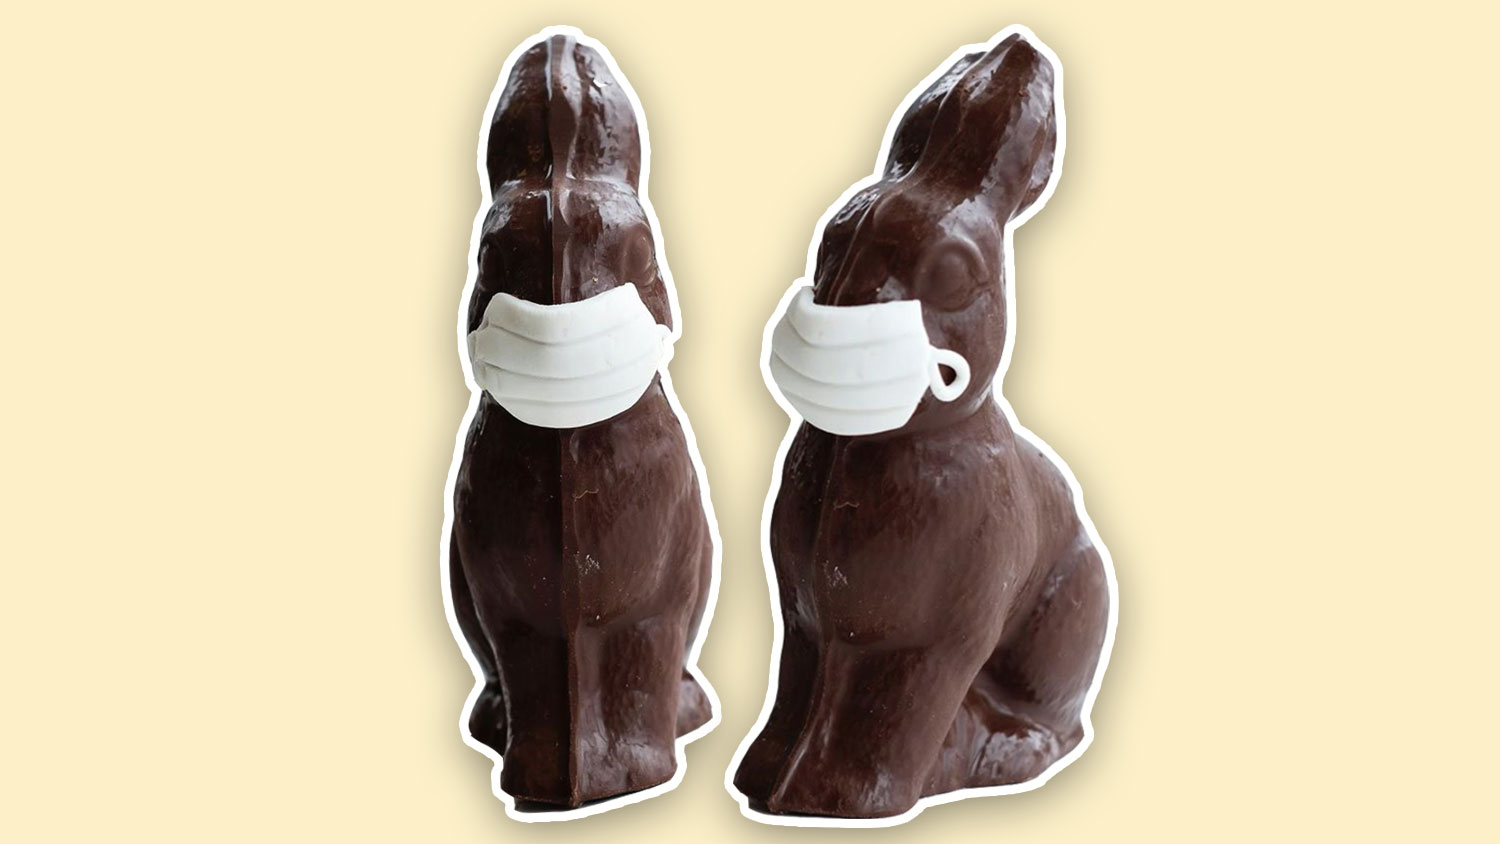 You Can Get COVID-Friendly Vegan Chocolate Easter Bunnies